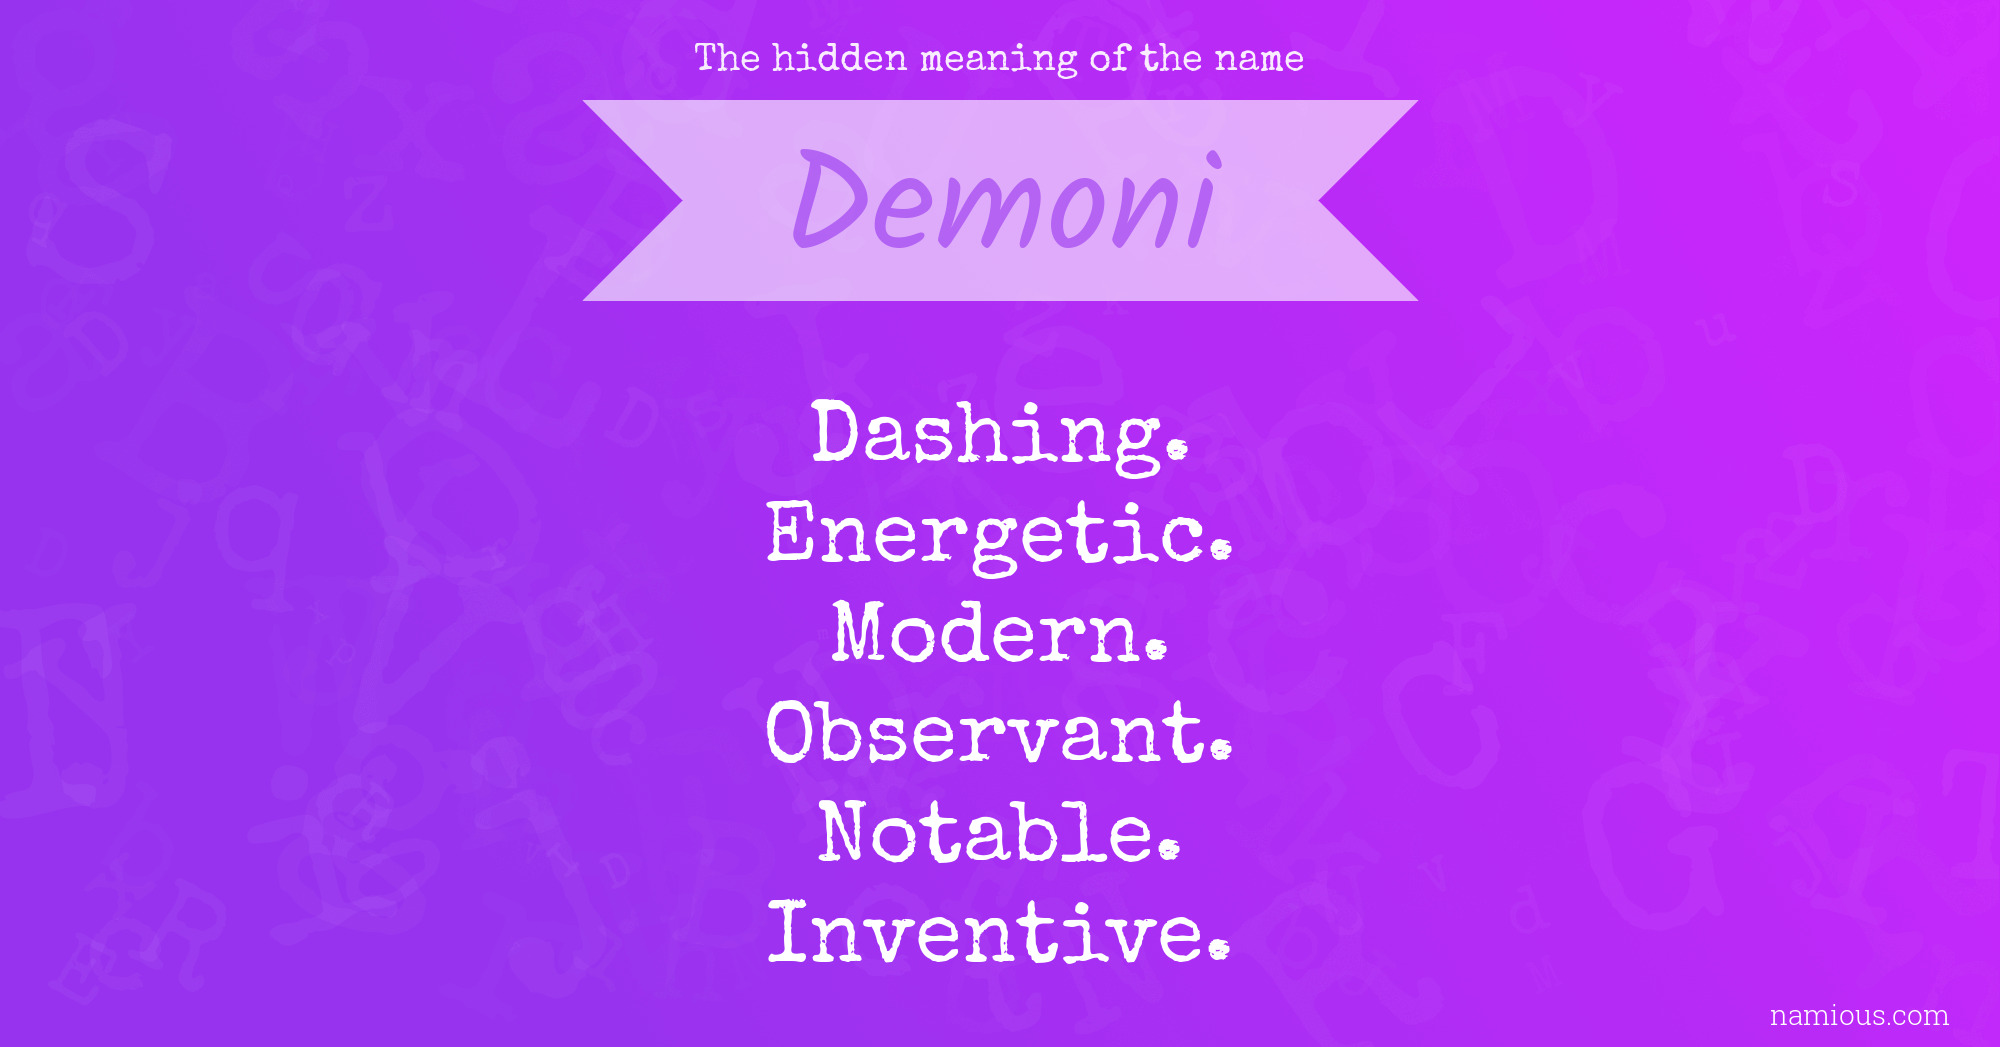 The hidden meaning of the name Demoni